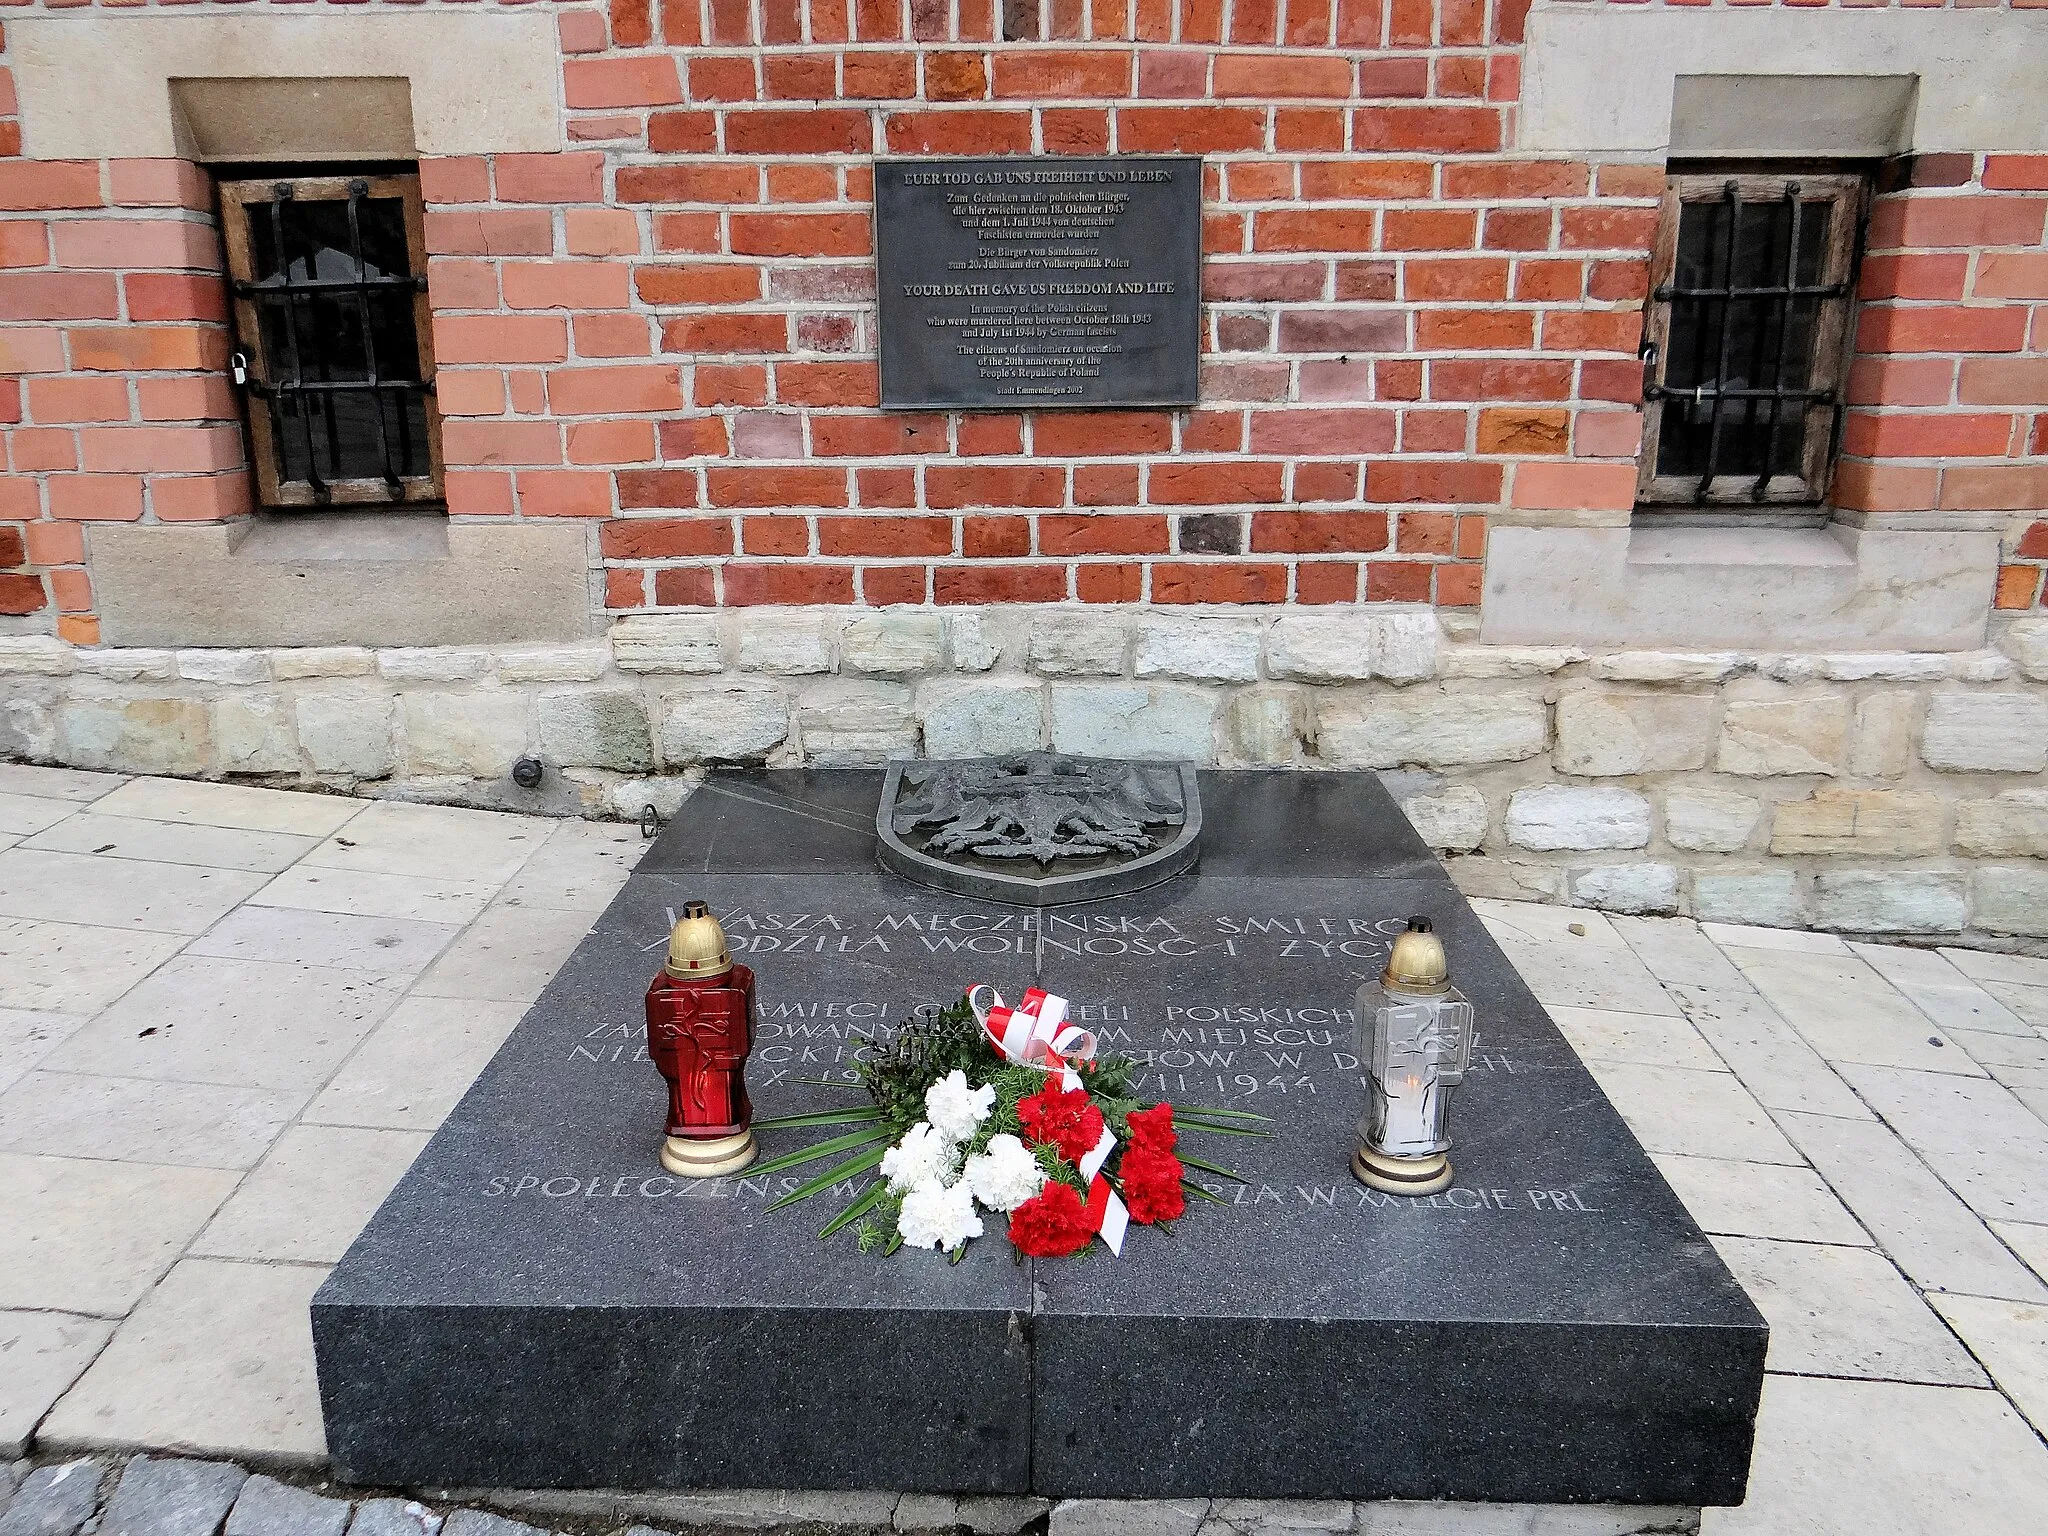 Photo showing: Place of Memory the victims of Nazi crimes in the years 1943 - 1944 next to the Town Hall in Sandomierz